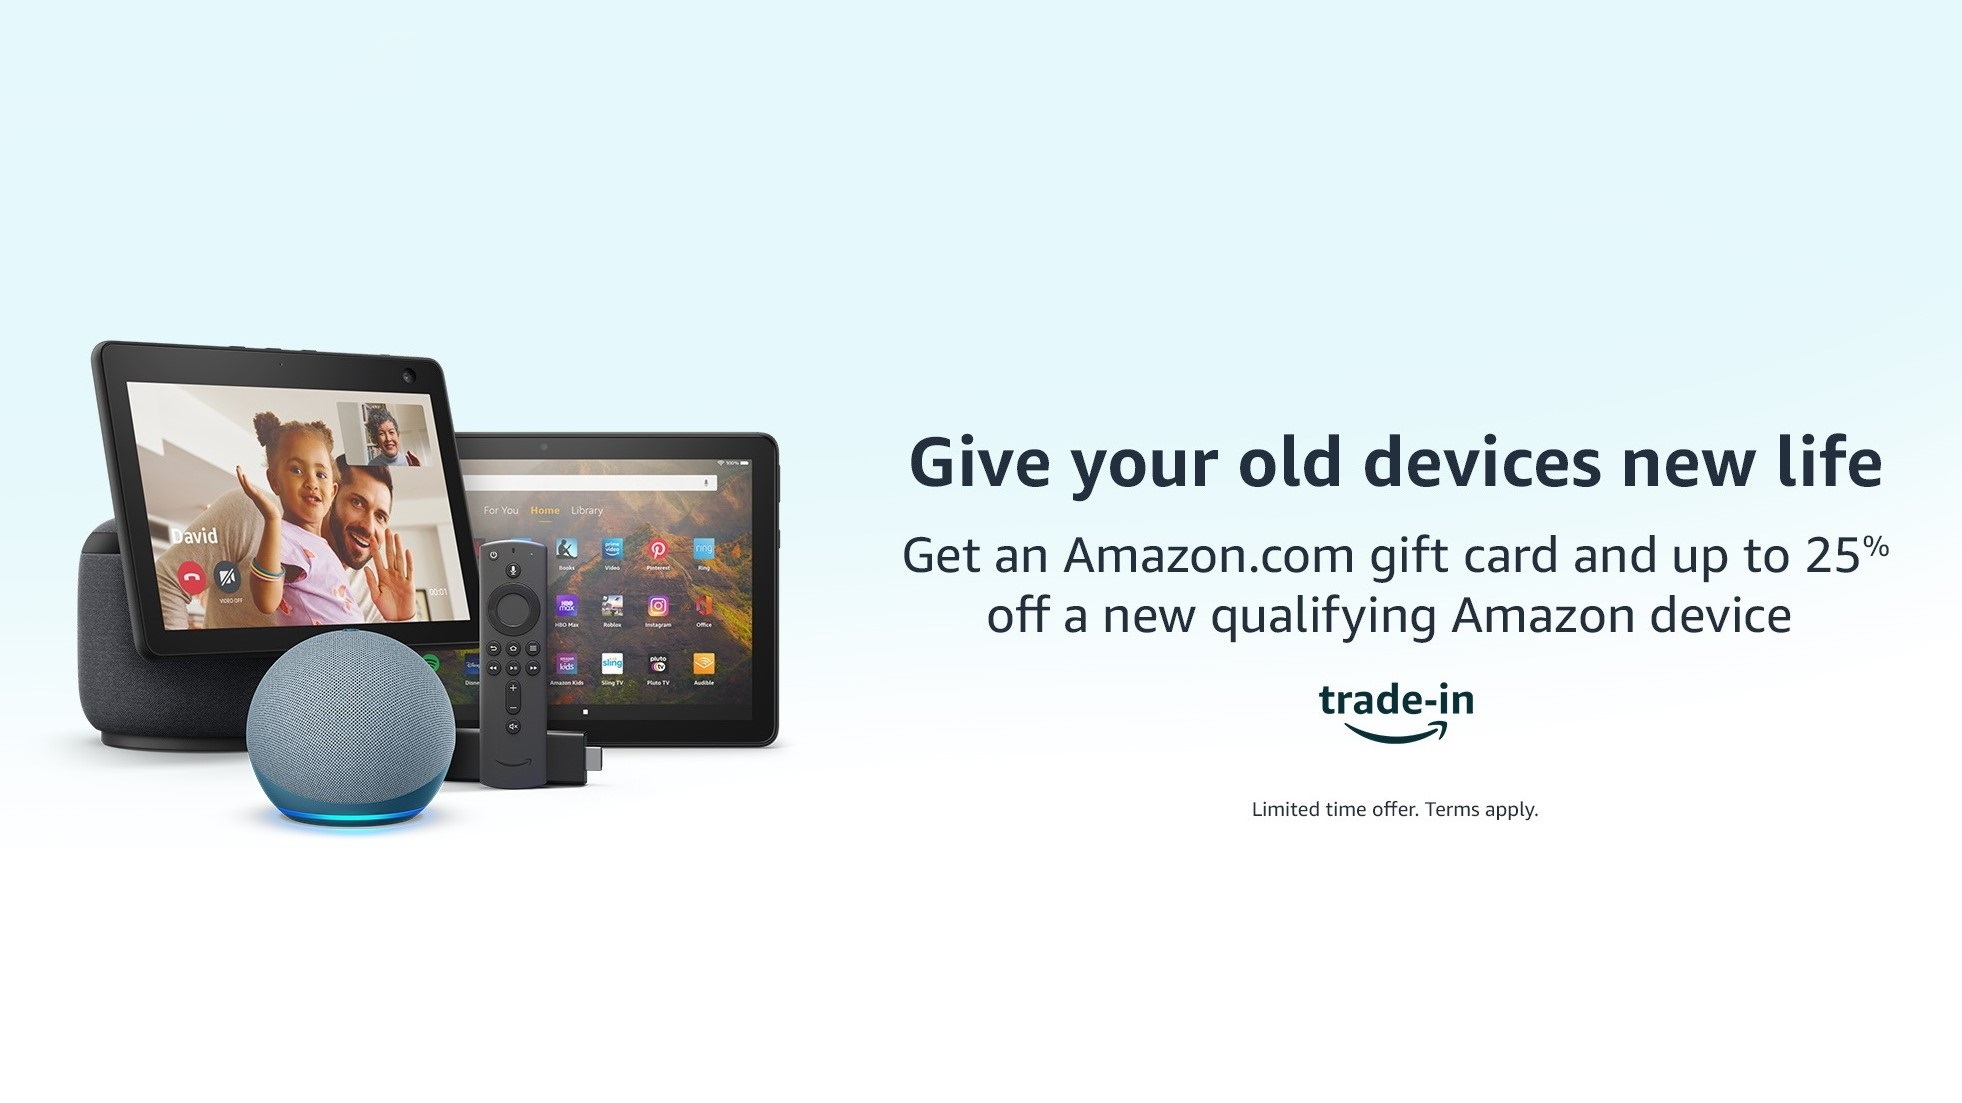 A trade-in ad from Amazon: 